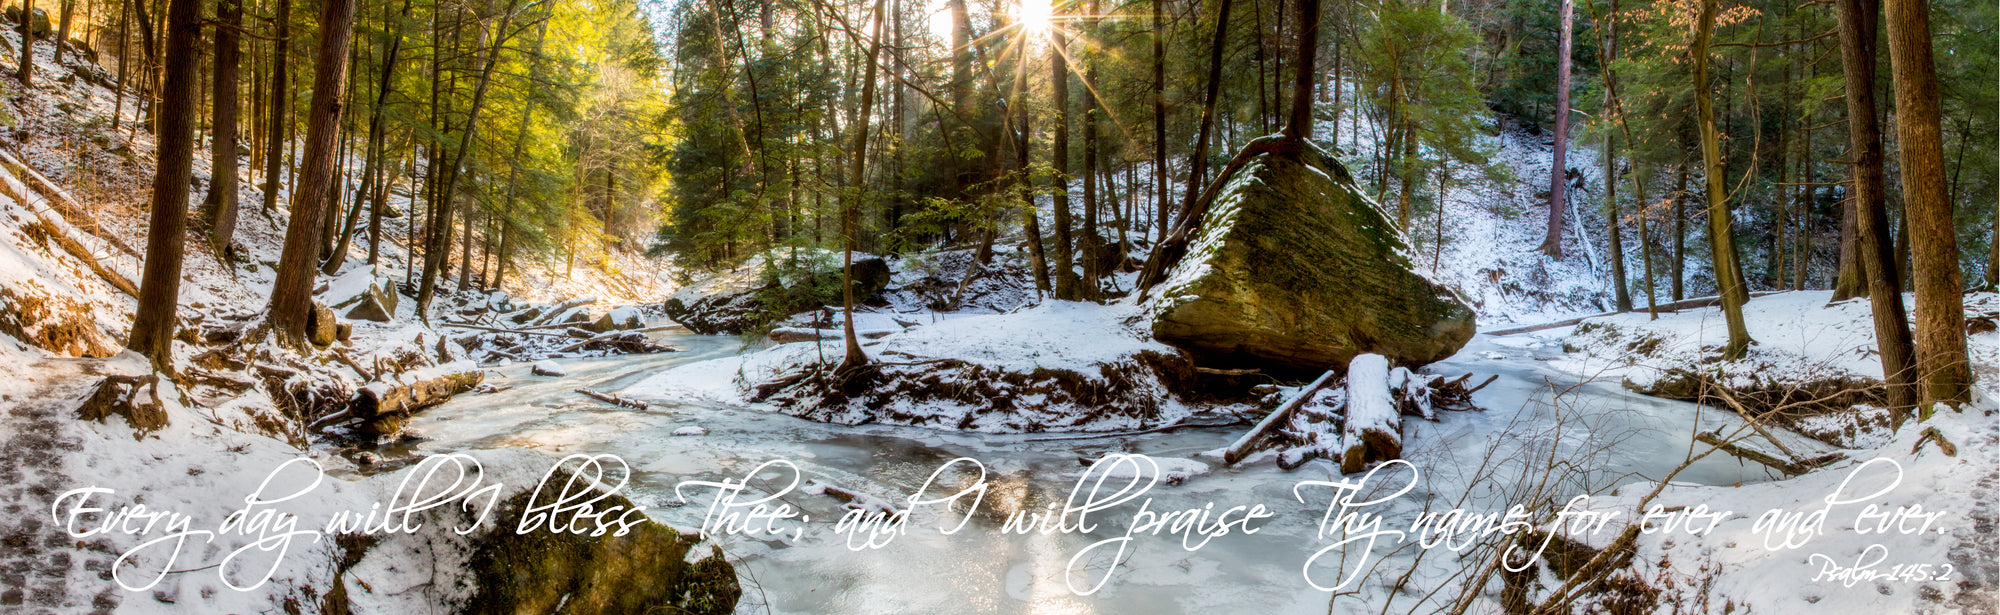 Panorama of stream through woods in winter at Old Man's Cave, Ohio with scripture verse